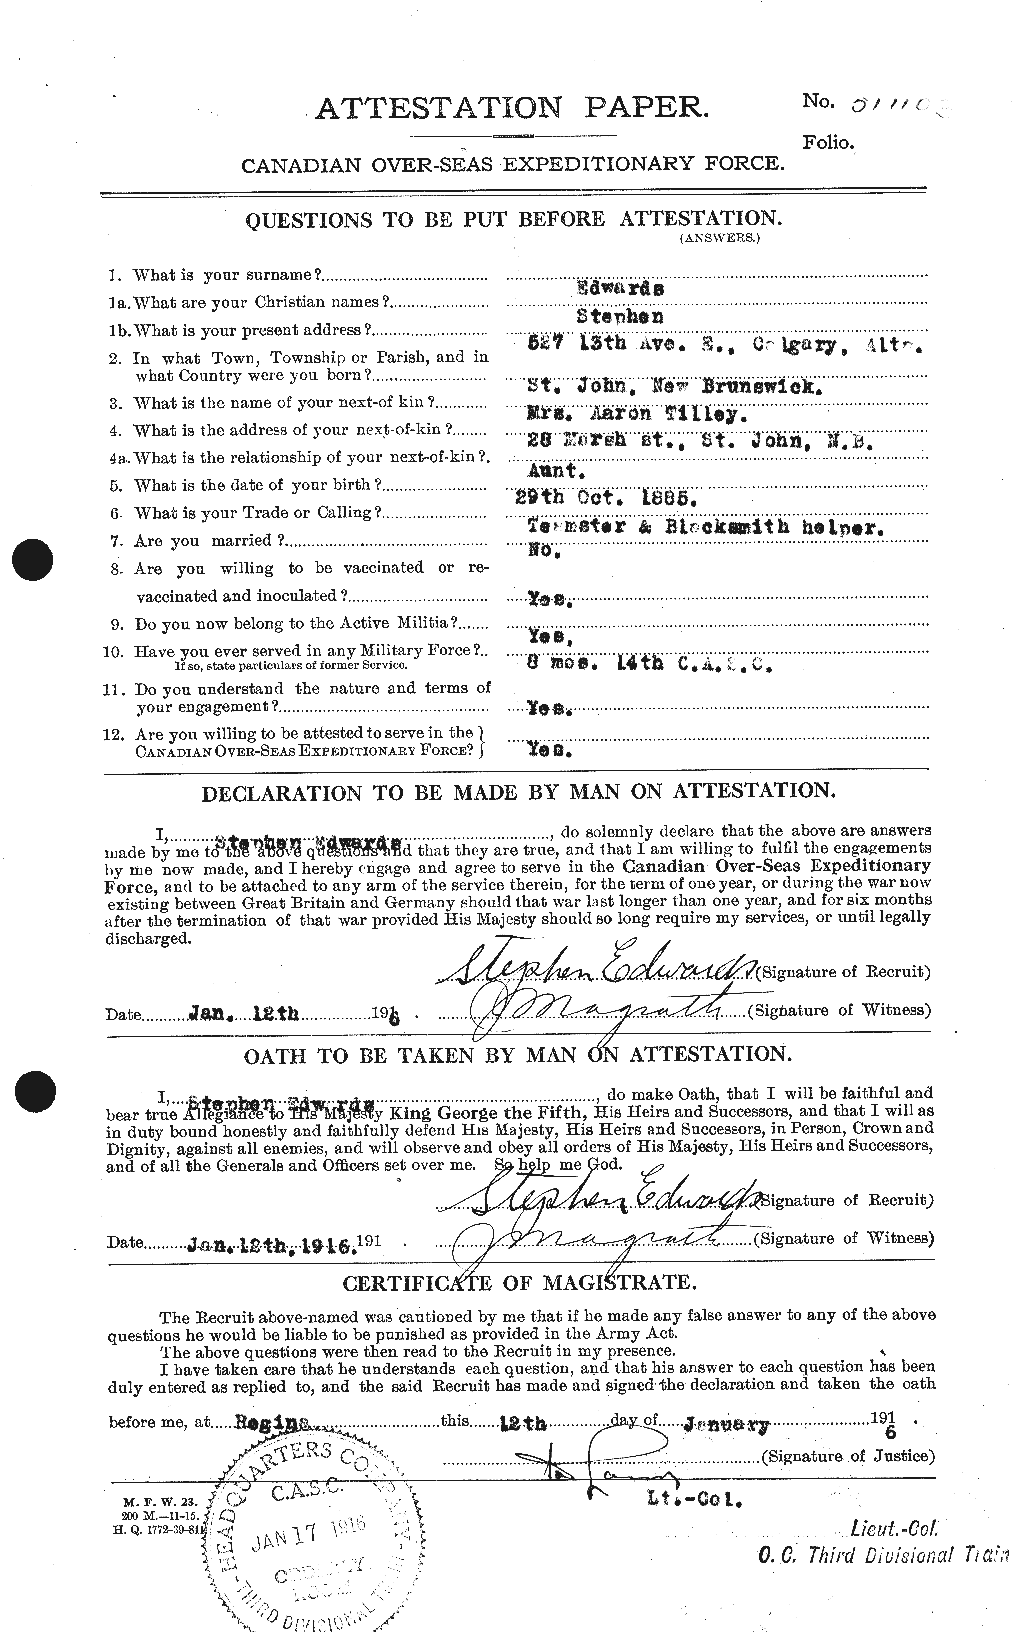 Personnel Records of the First World War - CEF 310322a